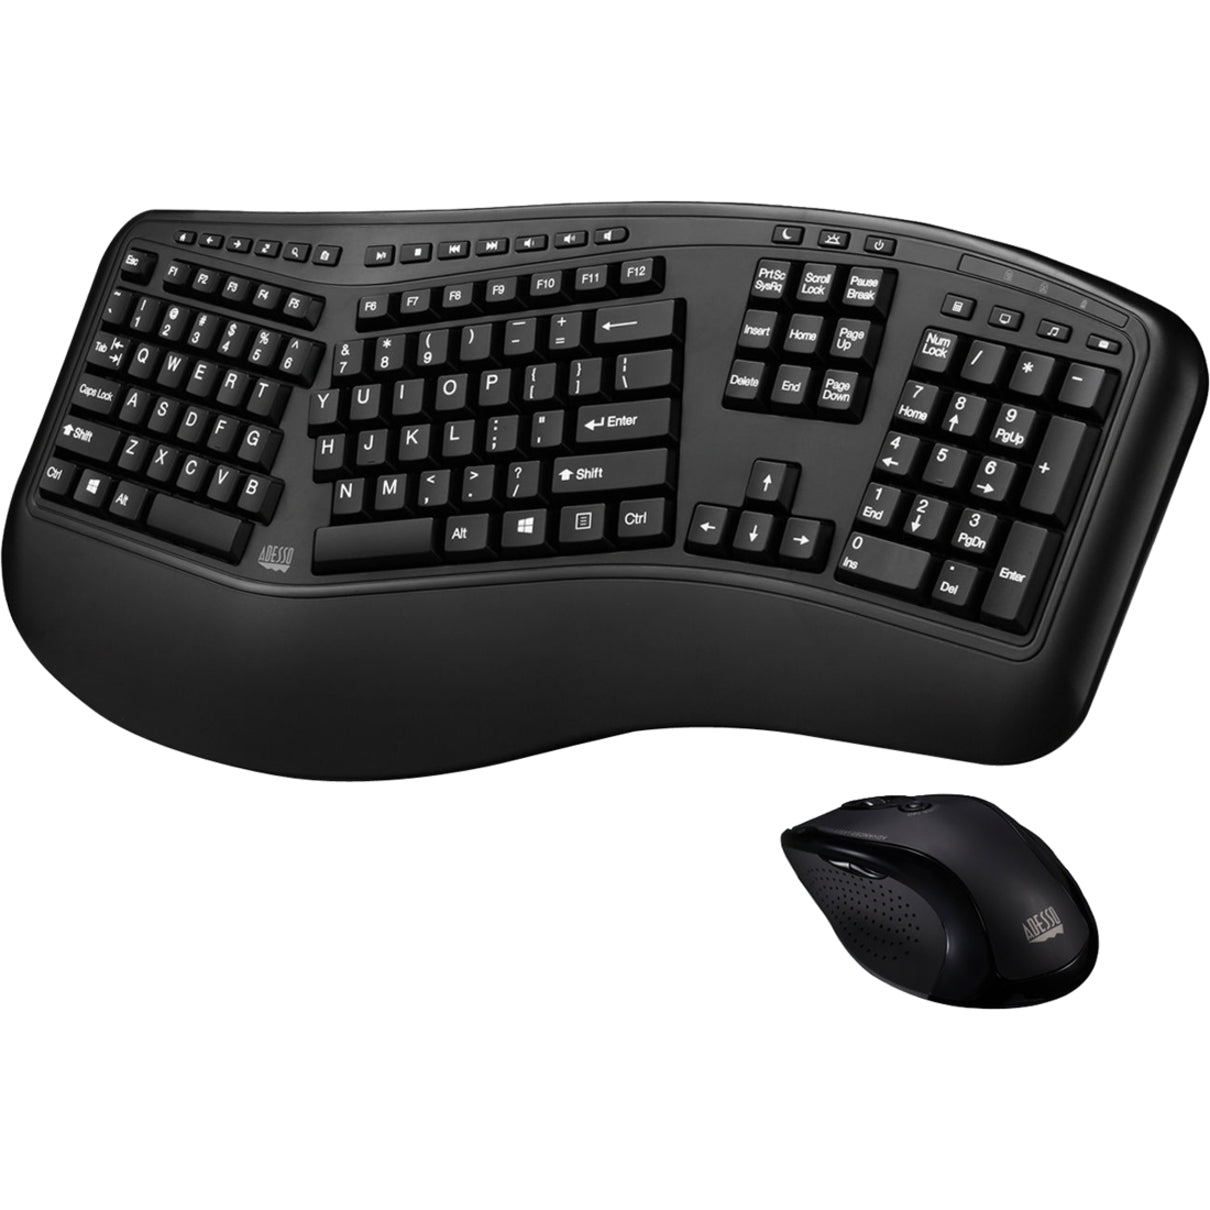 Adesso WKB-1500GB Tru-Form Media 1500 - Wireless Ergonomic Keyboard and Laser Mouse, 2.4 GHz, PC-Compatible